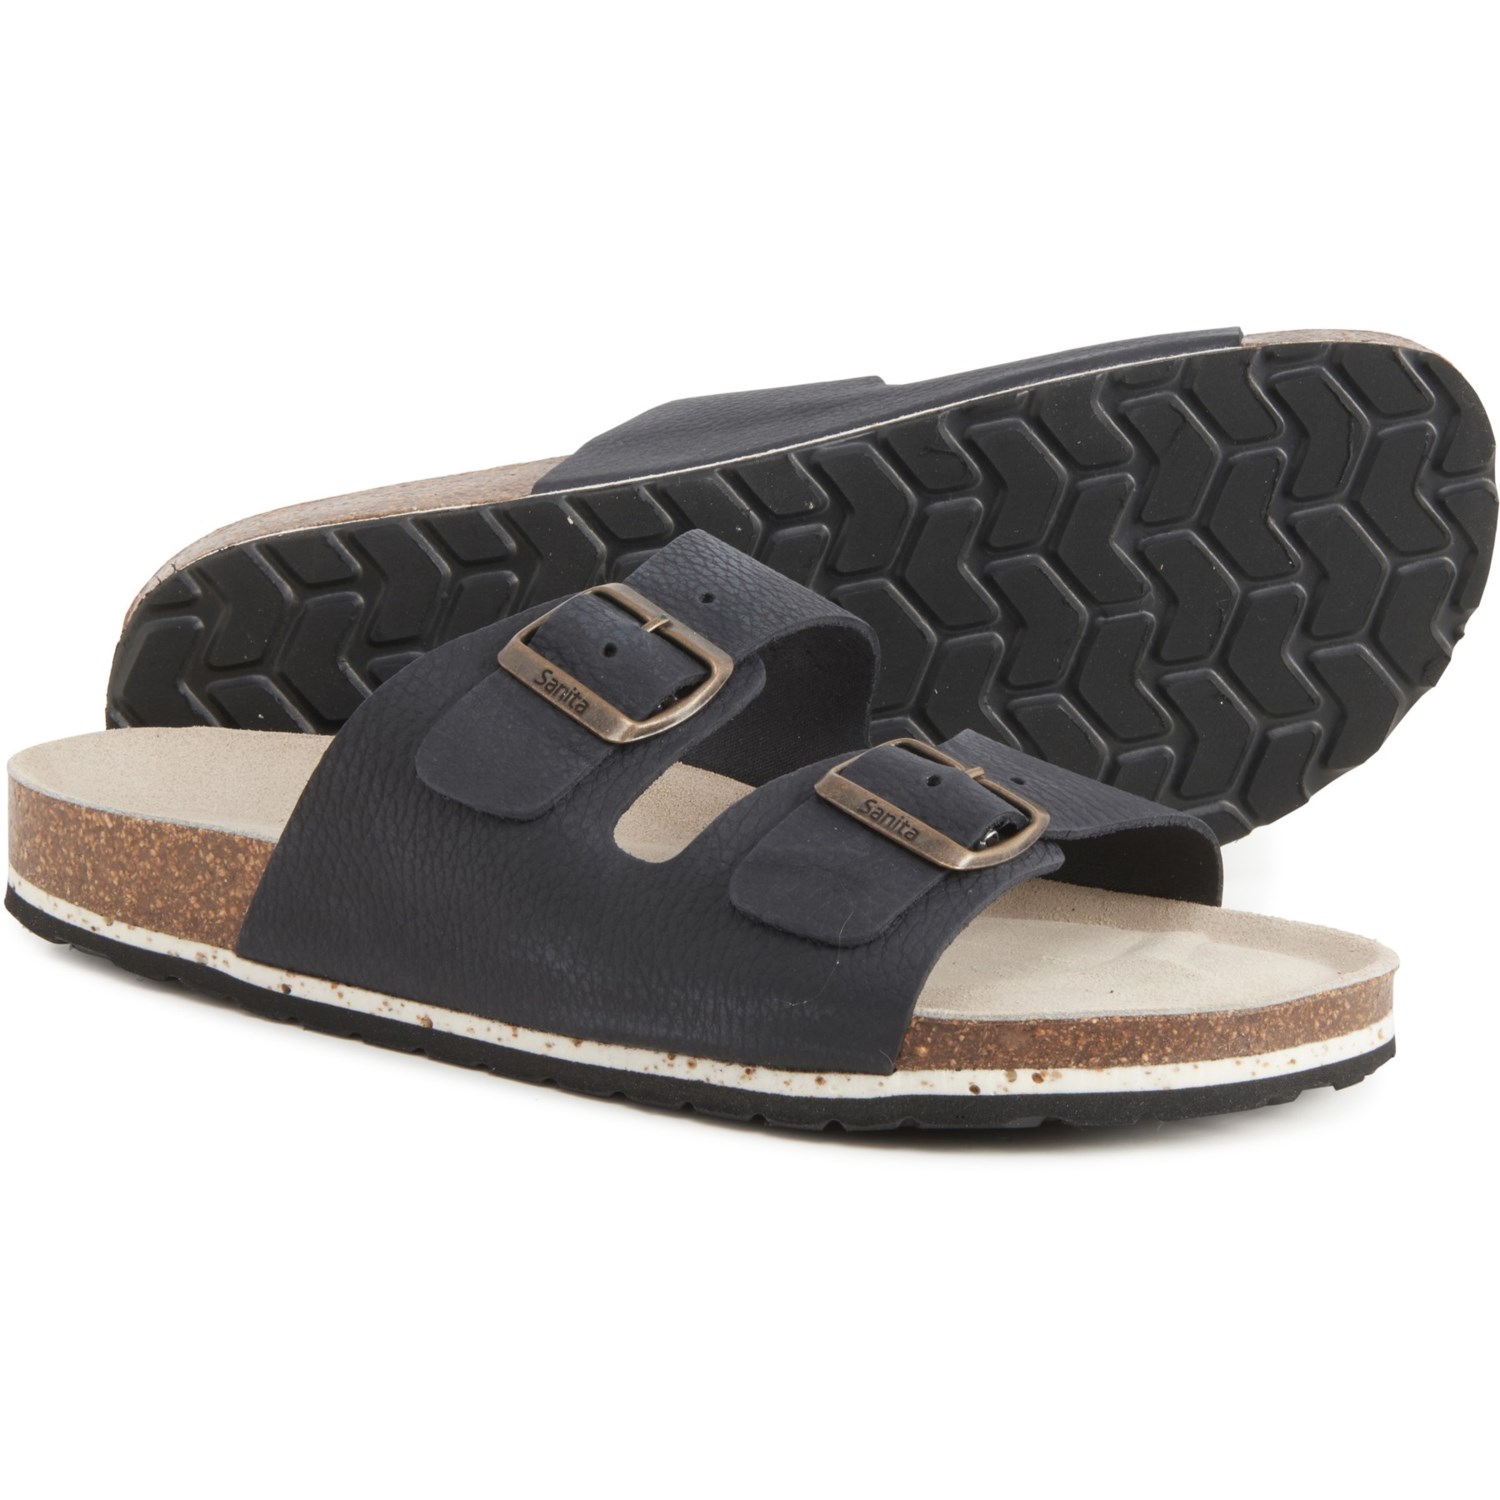 Sanita Made in Spain Ibiza Sandals - Oiled Leather (For Men)